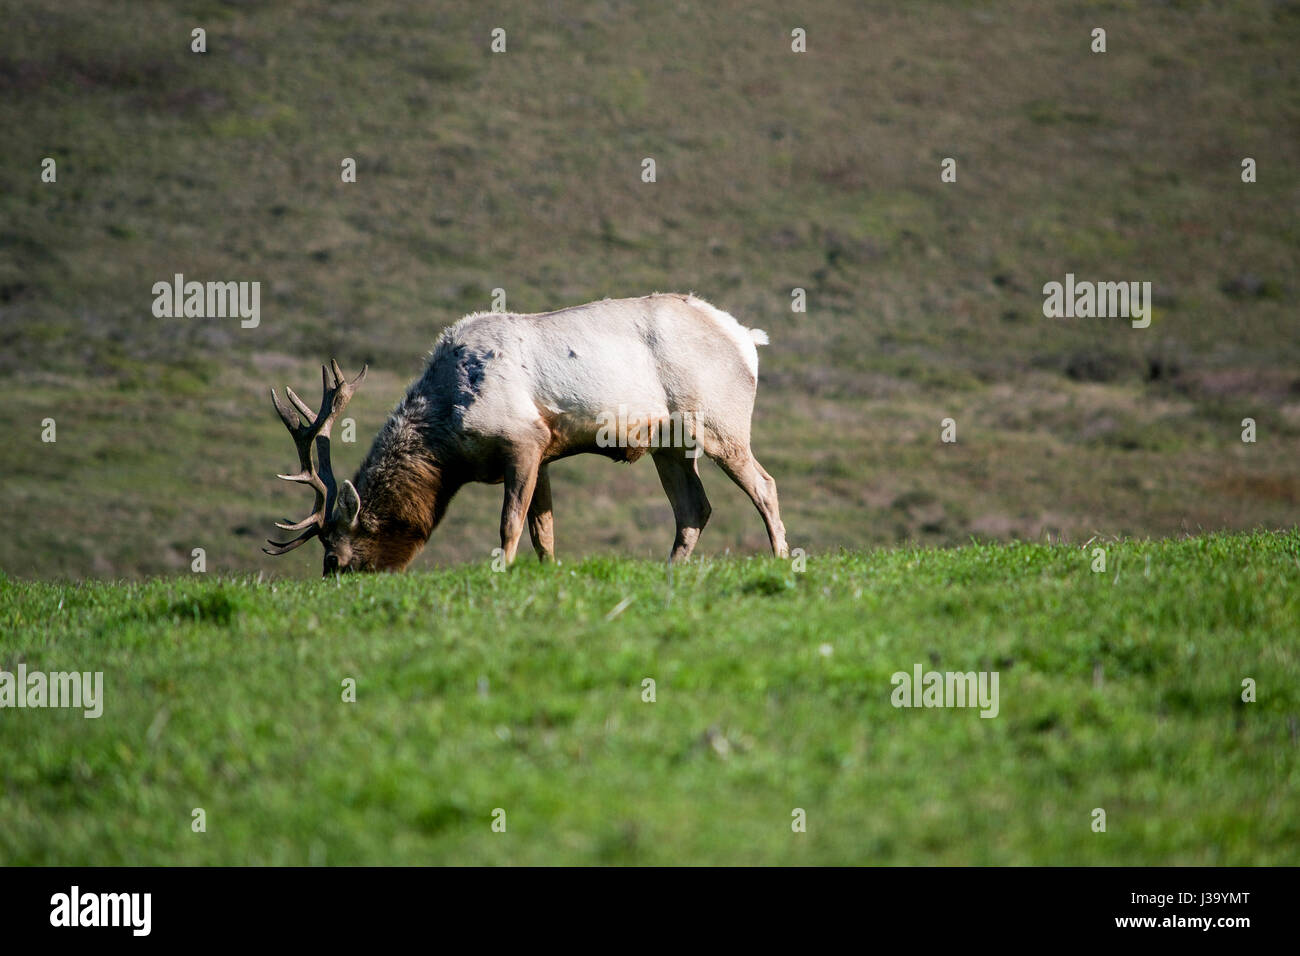 Male Tule Elk, Cervus canadensis nannodes, at a distance, looking at the camera, on the coast of California, USA, Marin County Stock Photo